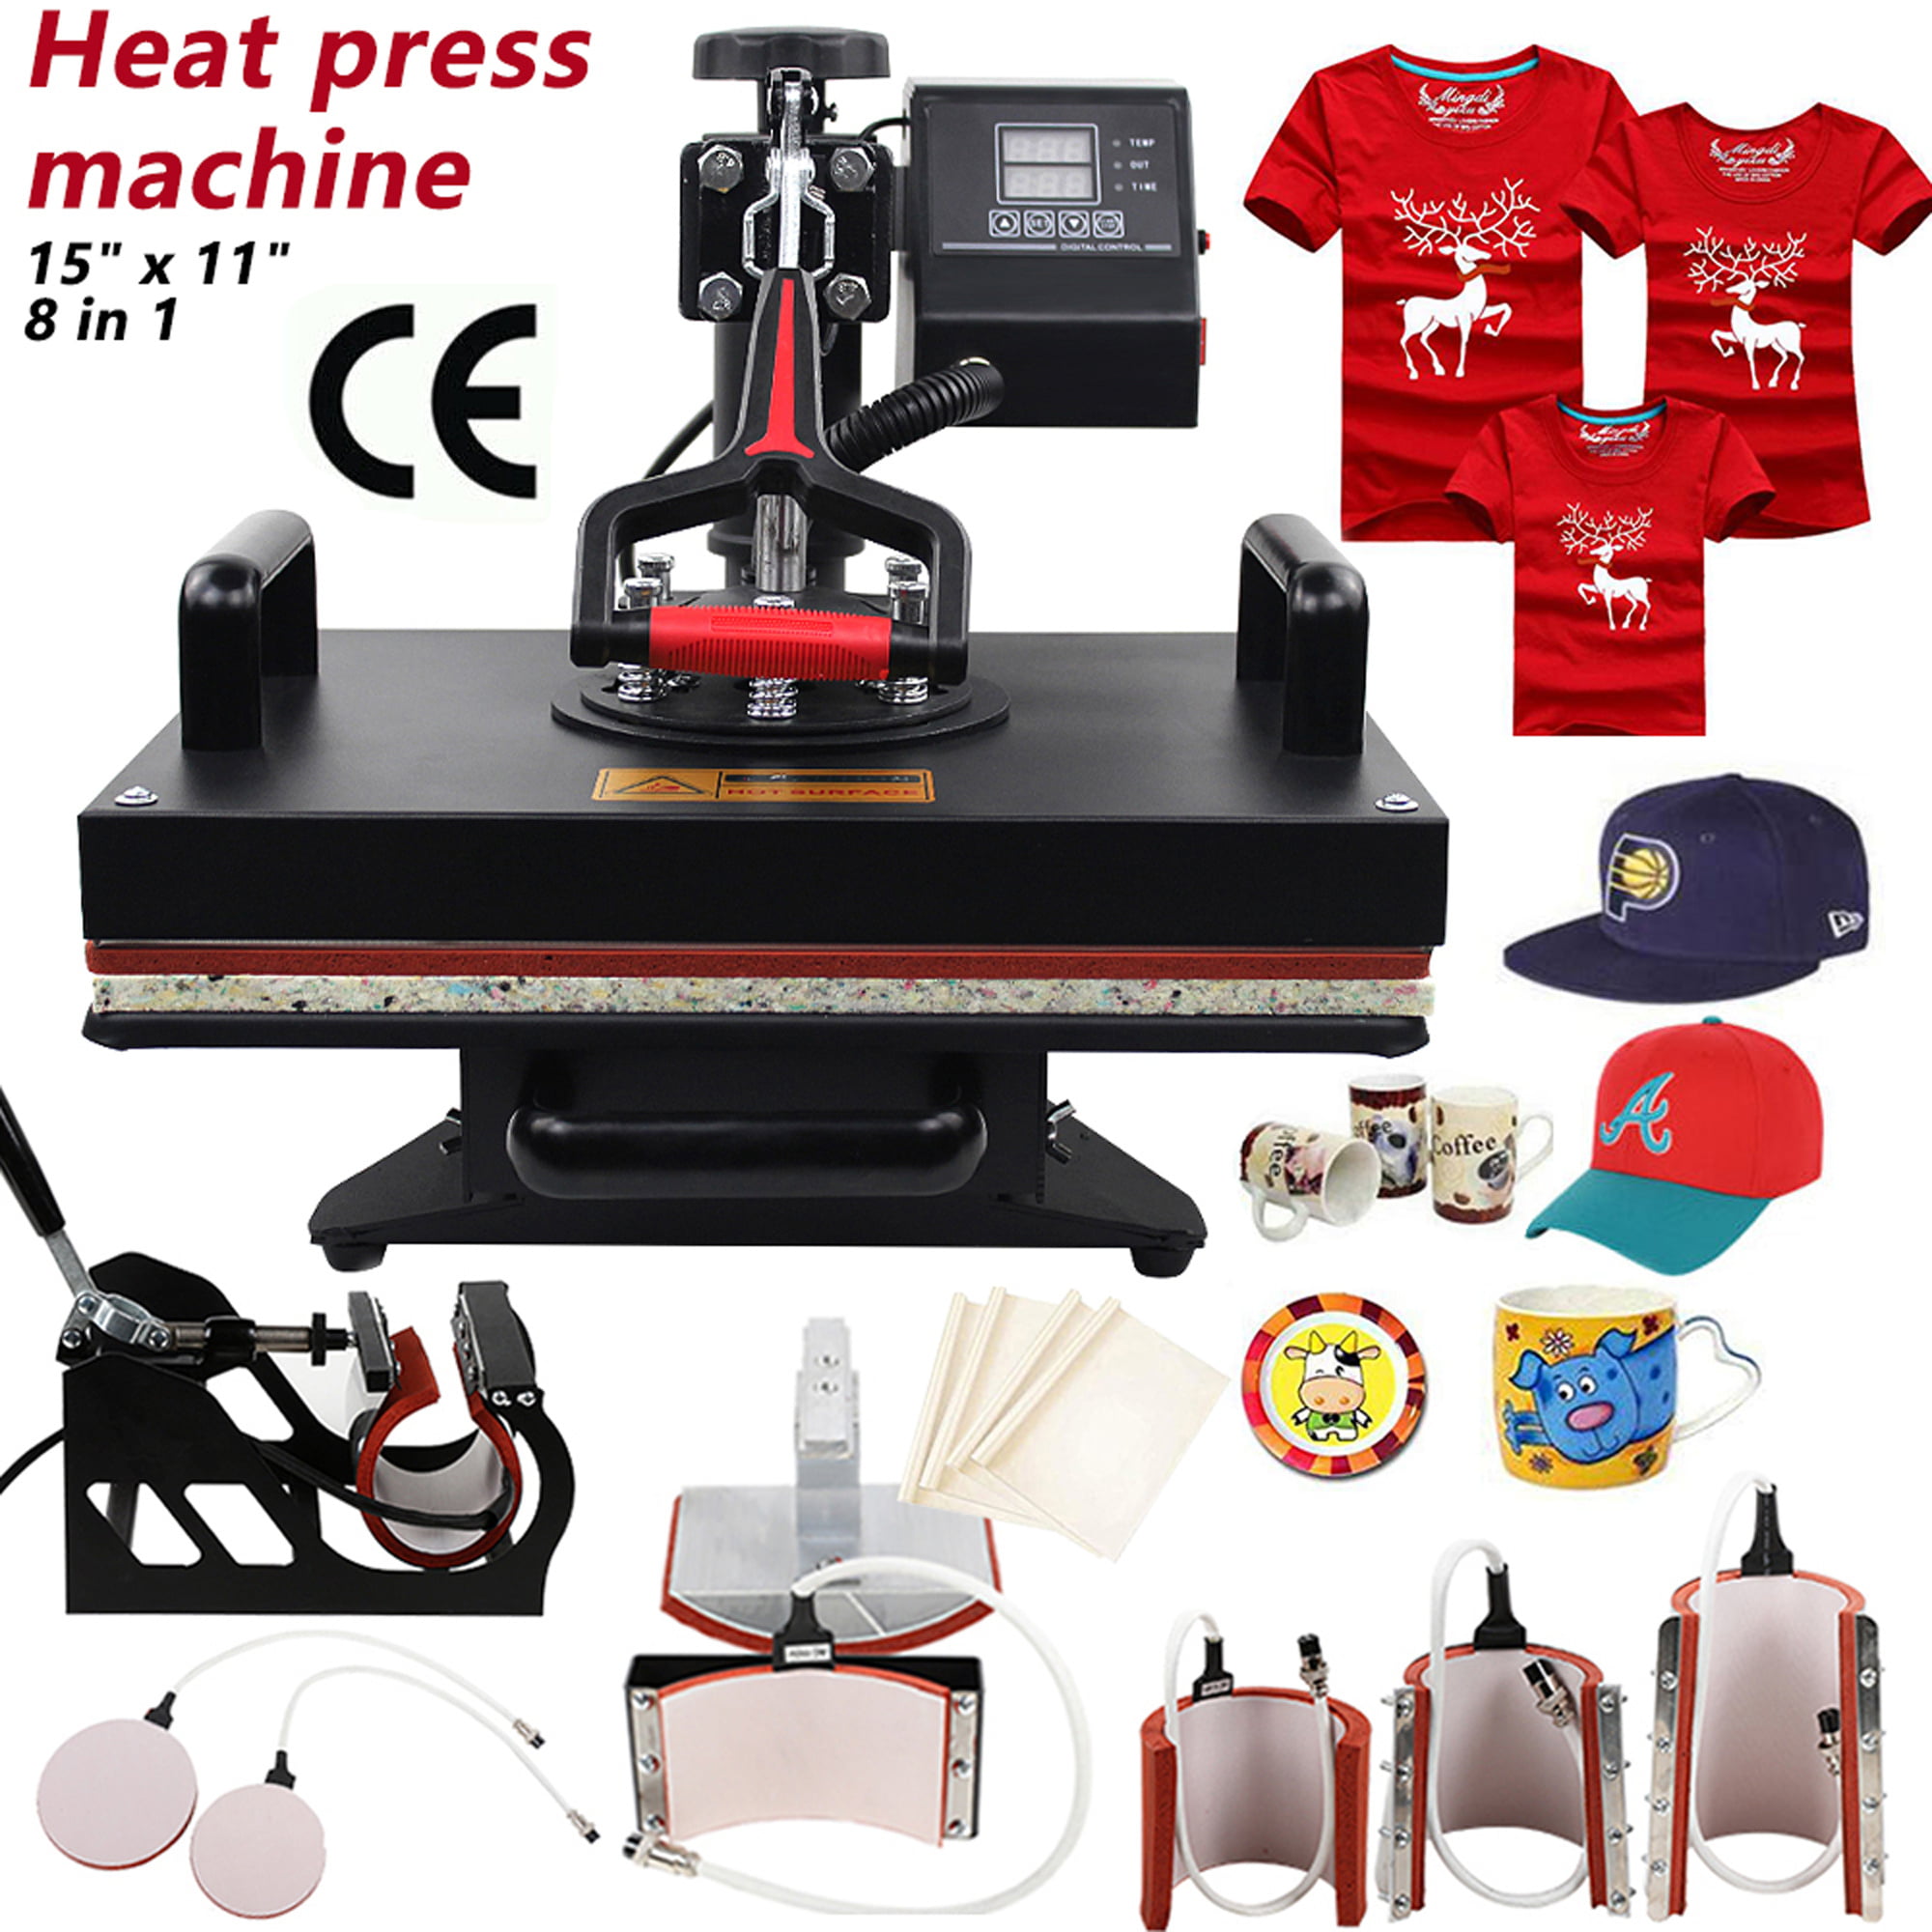 8 in 1 Heat Press Machine For T-Shirt 15" x 15" Combo Kit Sublimation Swing Away 